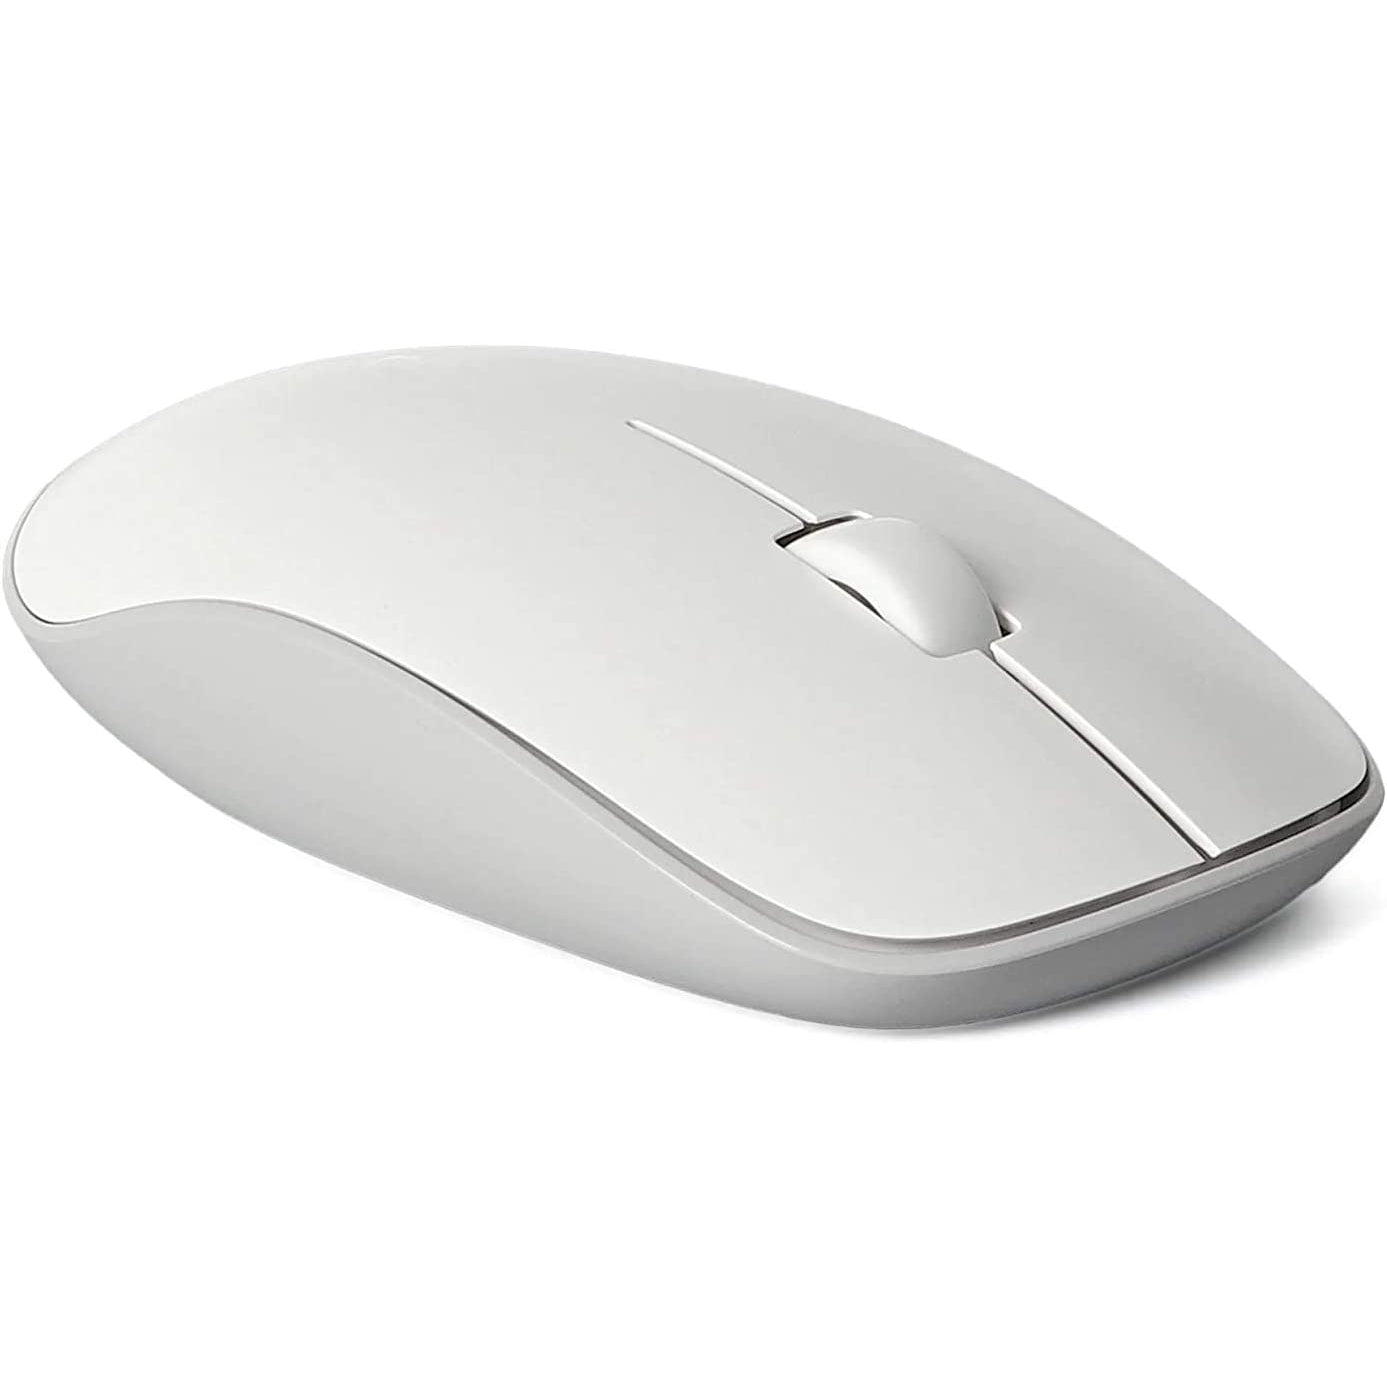 Rapoo M200 Silent Wireless Mouse - White - Refurbished Excellent